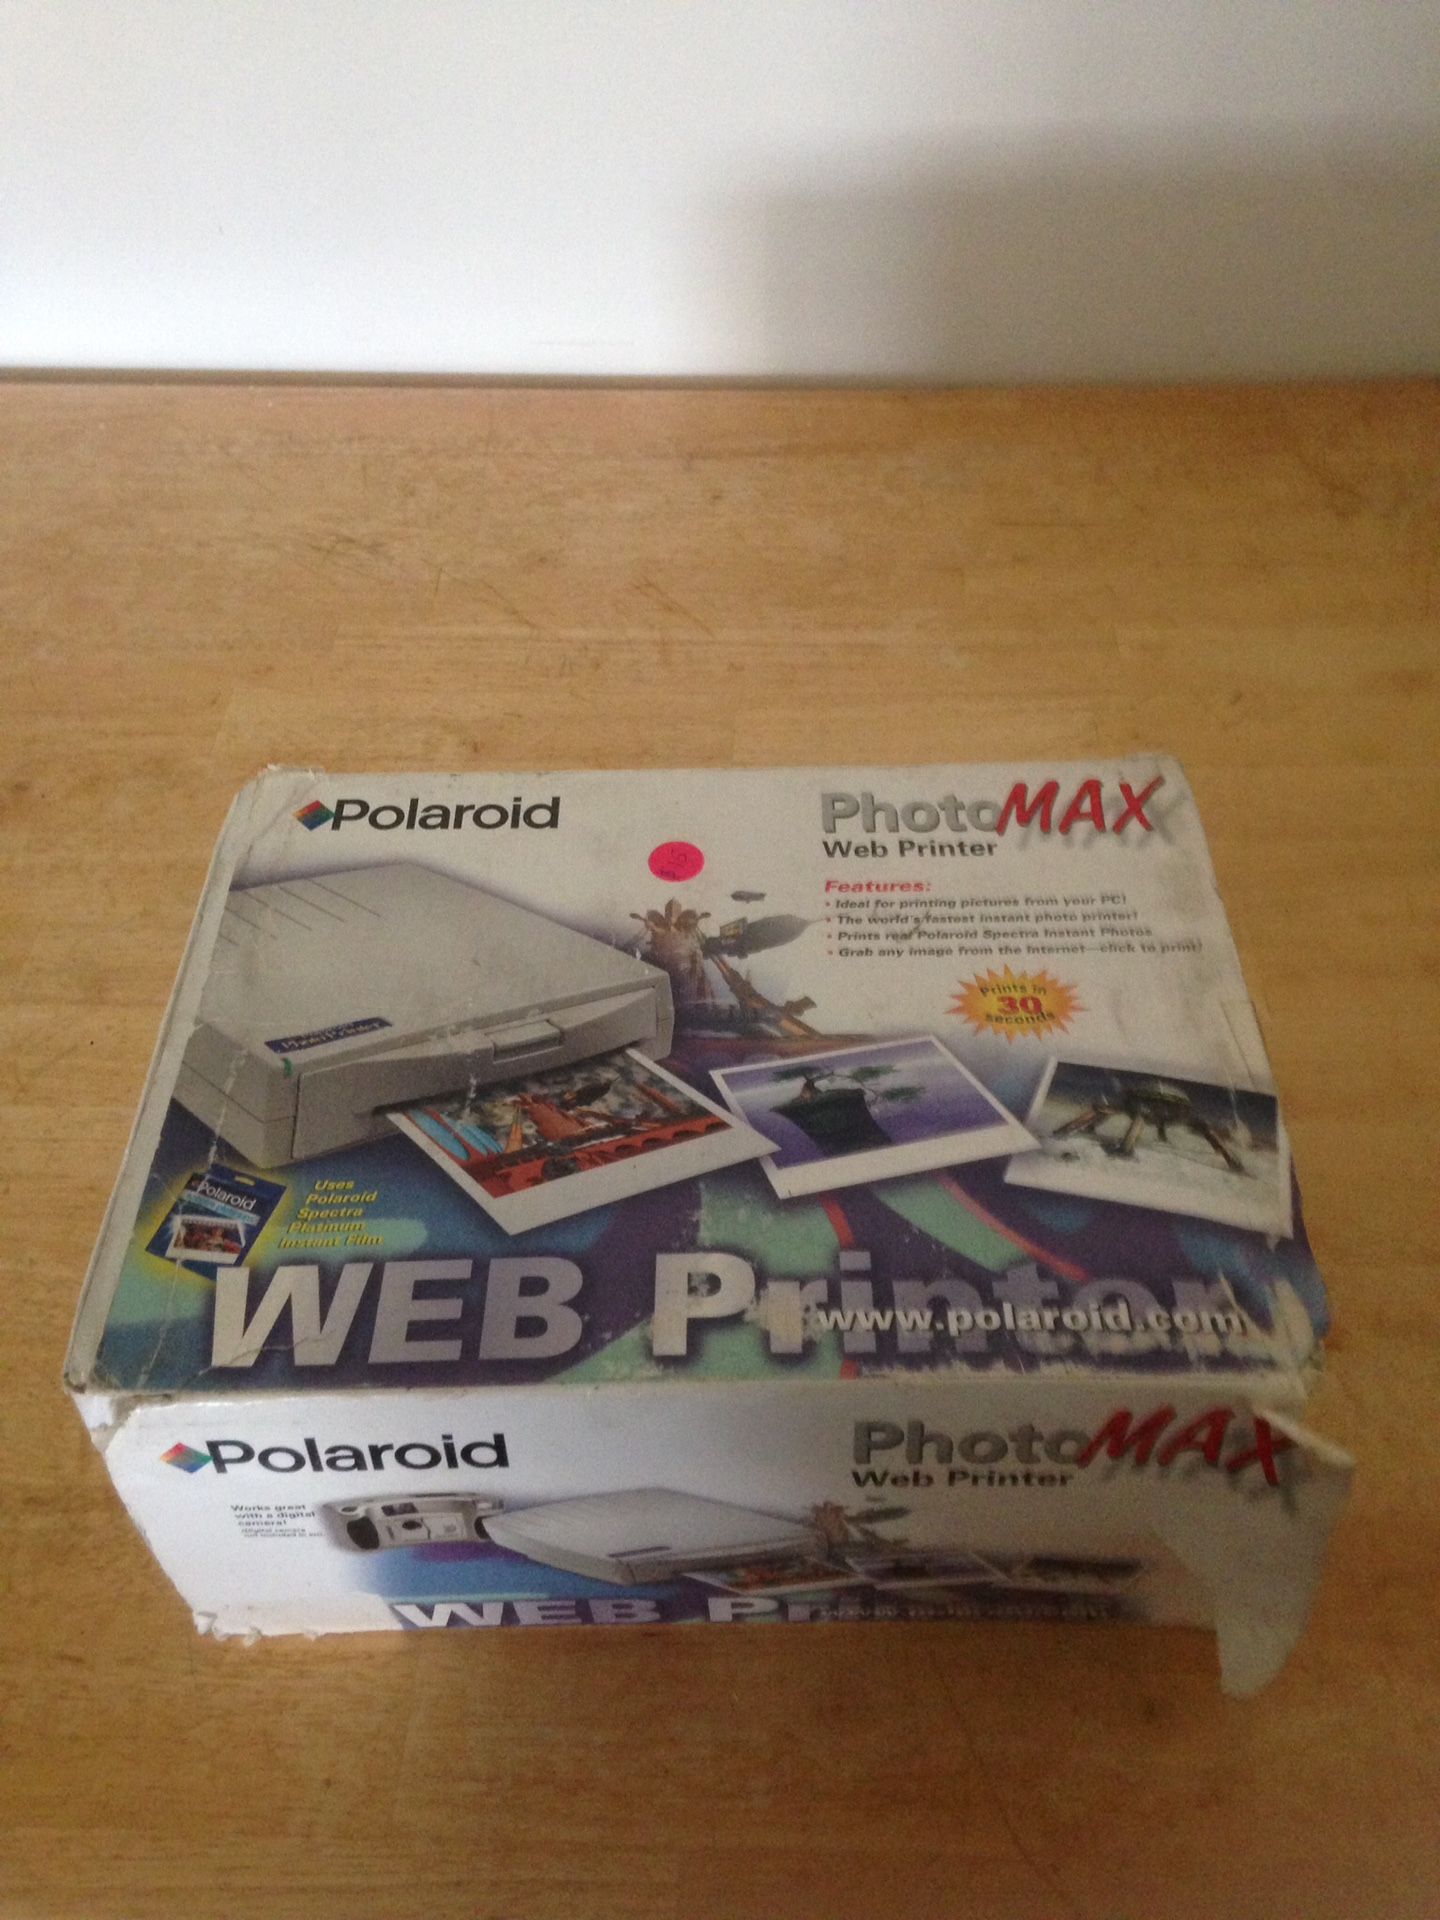 BNIB Polaroid PhotoMax Web Printer was issued orginally in 1999. Compatible with Windows 98 Never Used